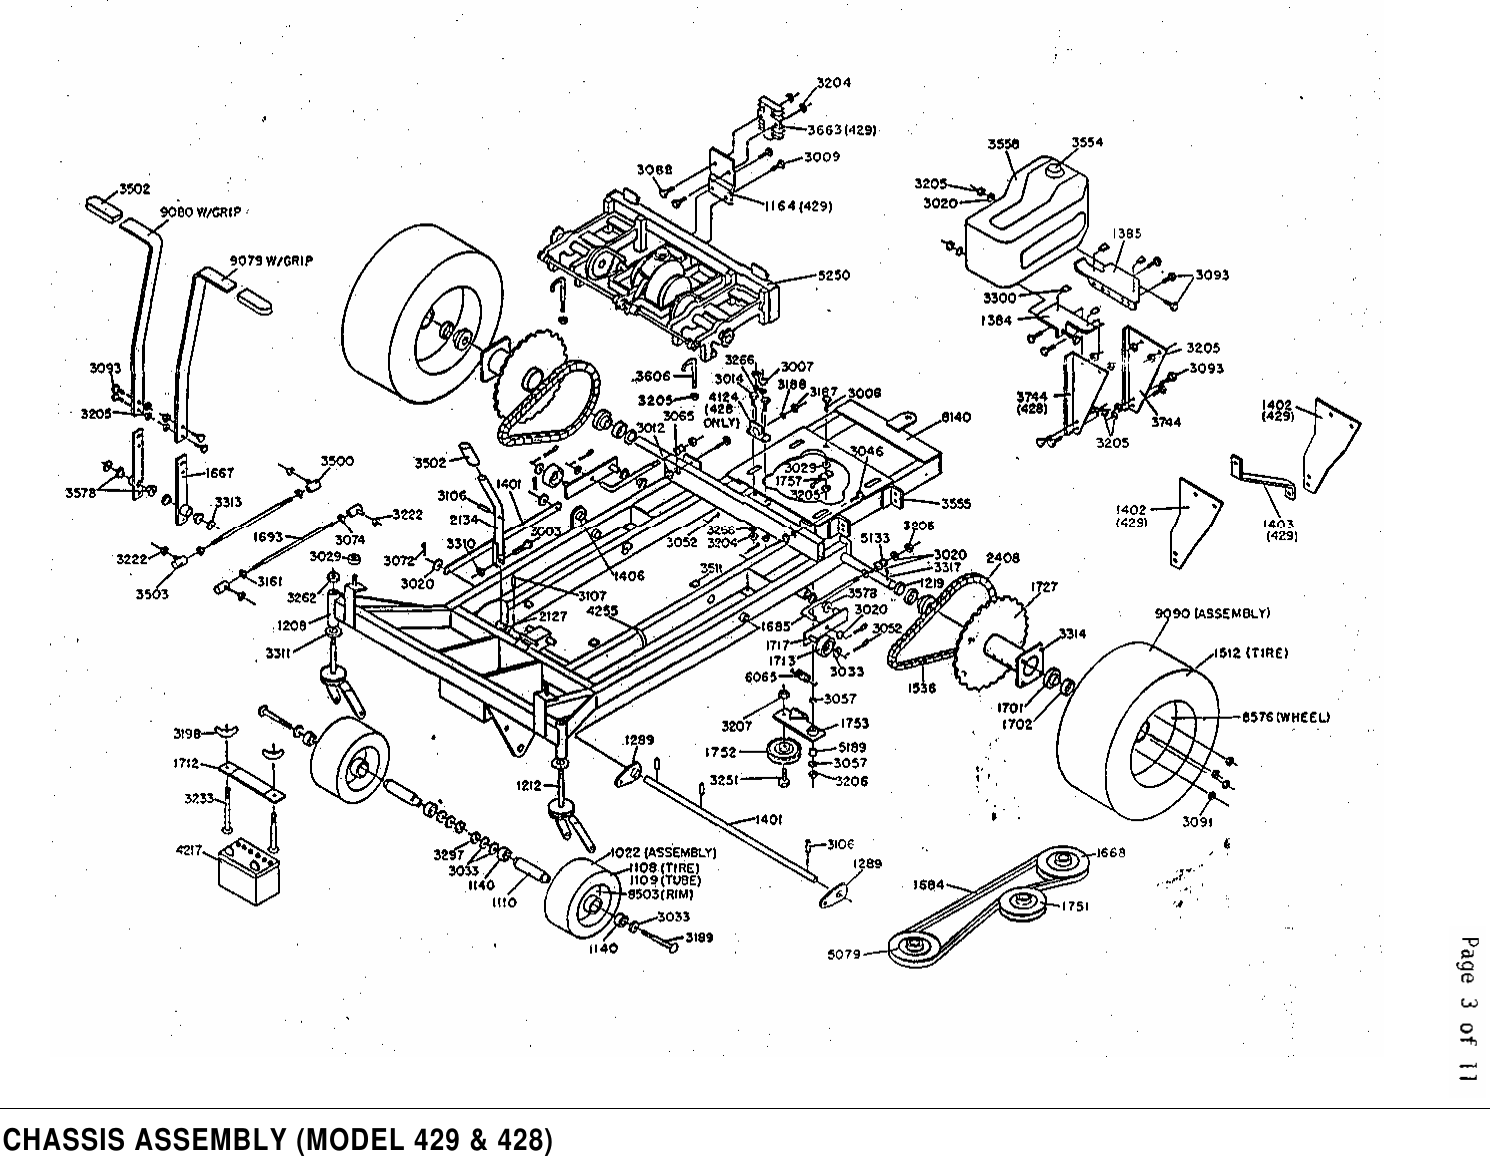 Page 2 of 6 - Dixon Dixon-Ztr-428-Users-Manual- 1990 Technical Data Brochure - ZTR 428 & 429  Dixon-ztr-428-users-manual